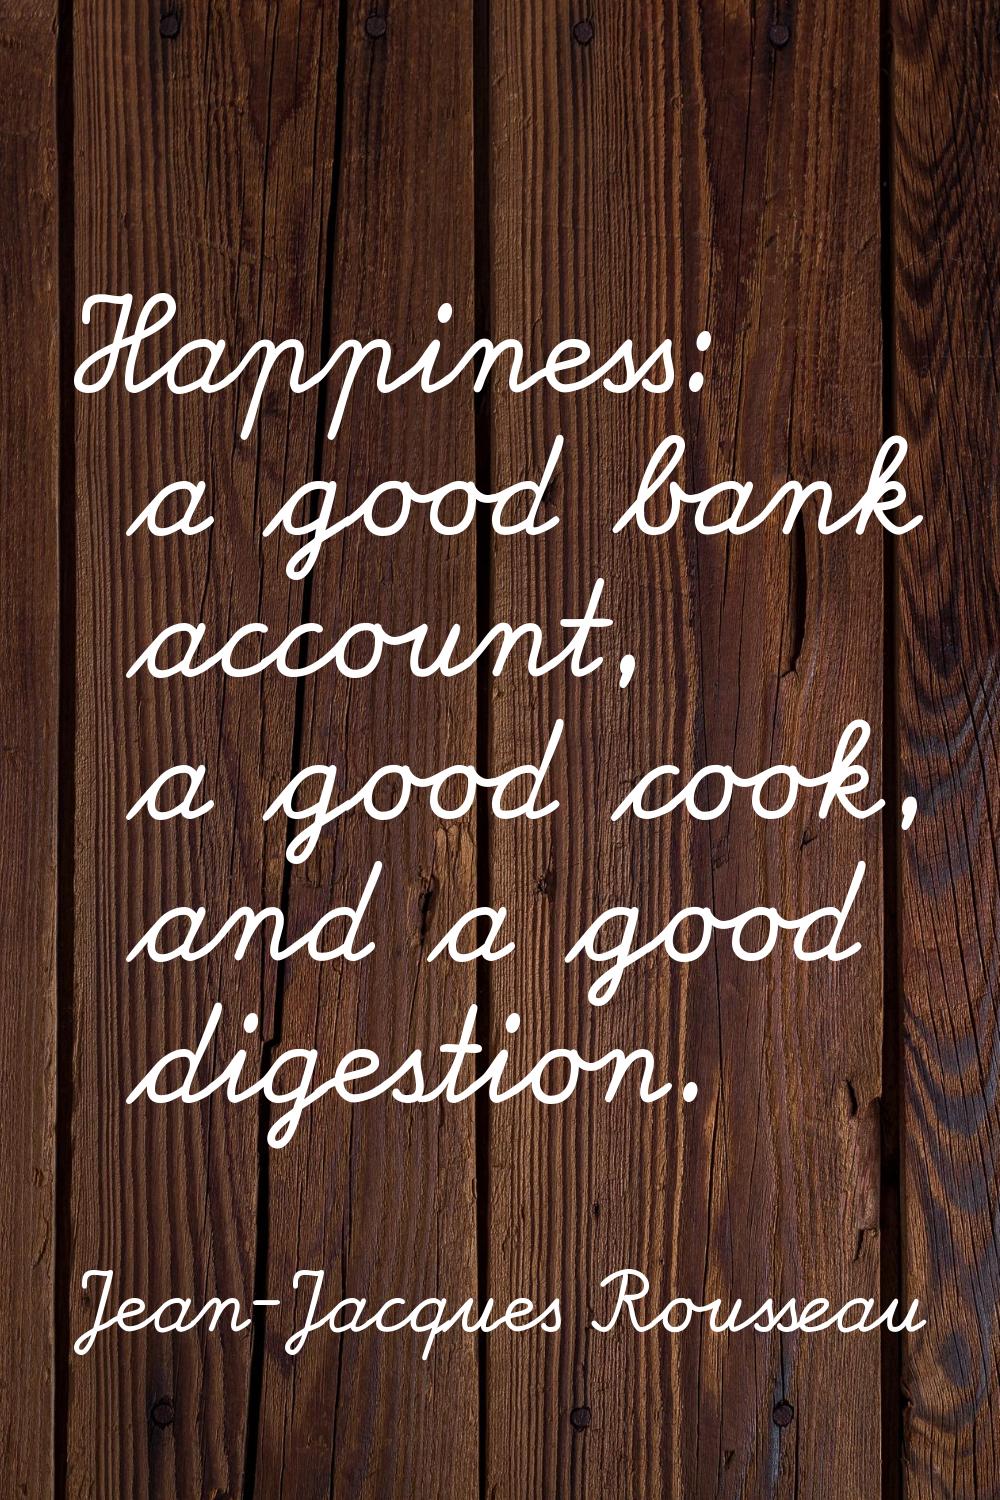 Happiness: a good bank account, a good cook, and a good digestion.